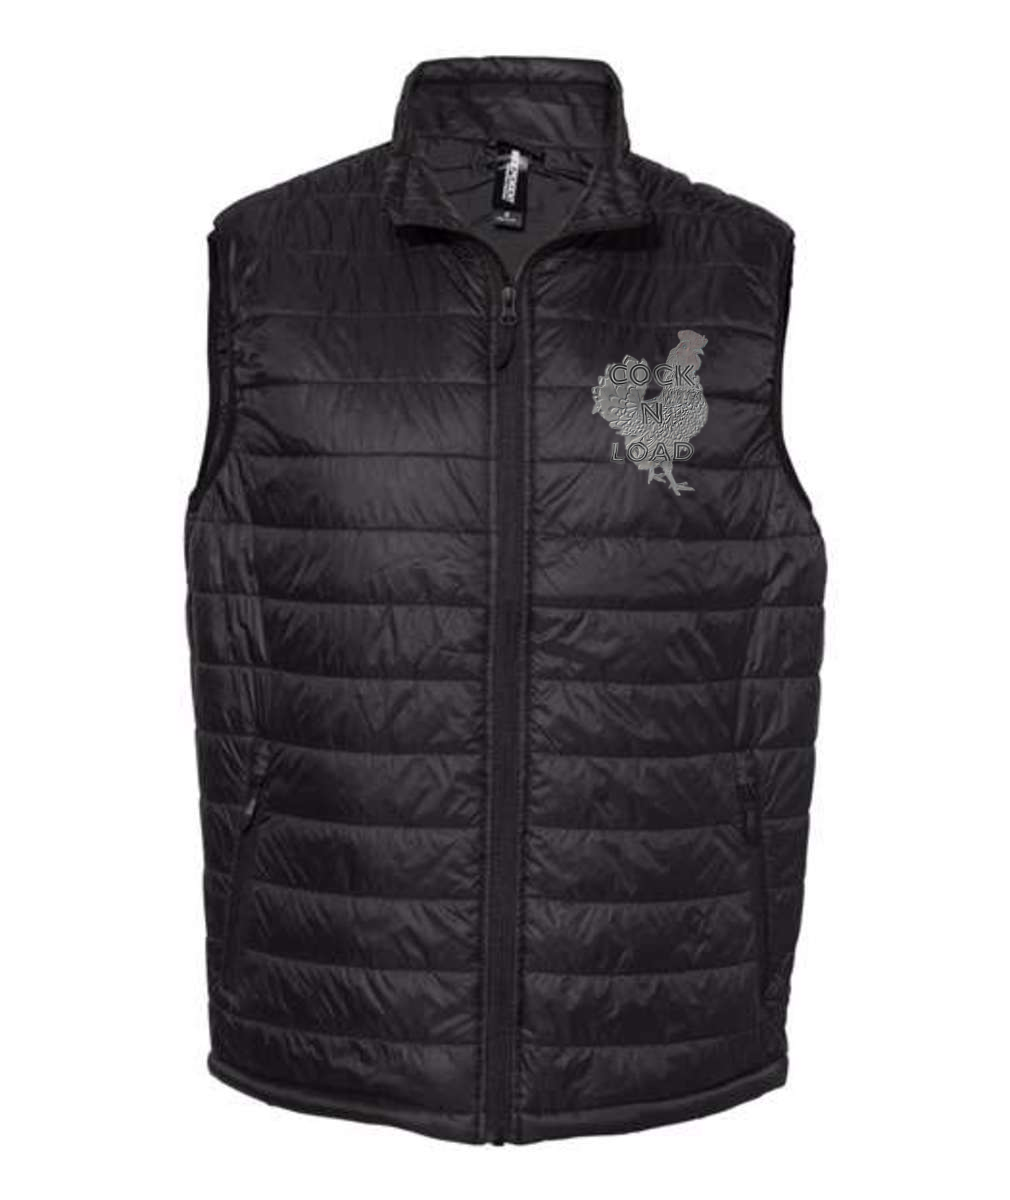 Cock n load Embroidered Independent Trading Co. - Puffer Vest or Similar